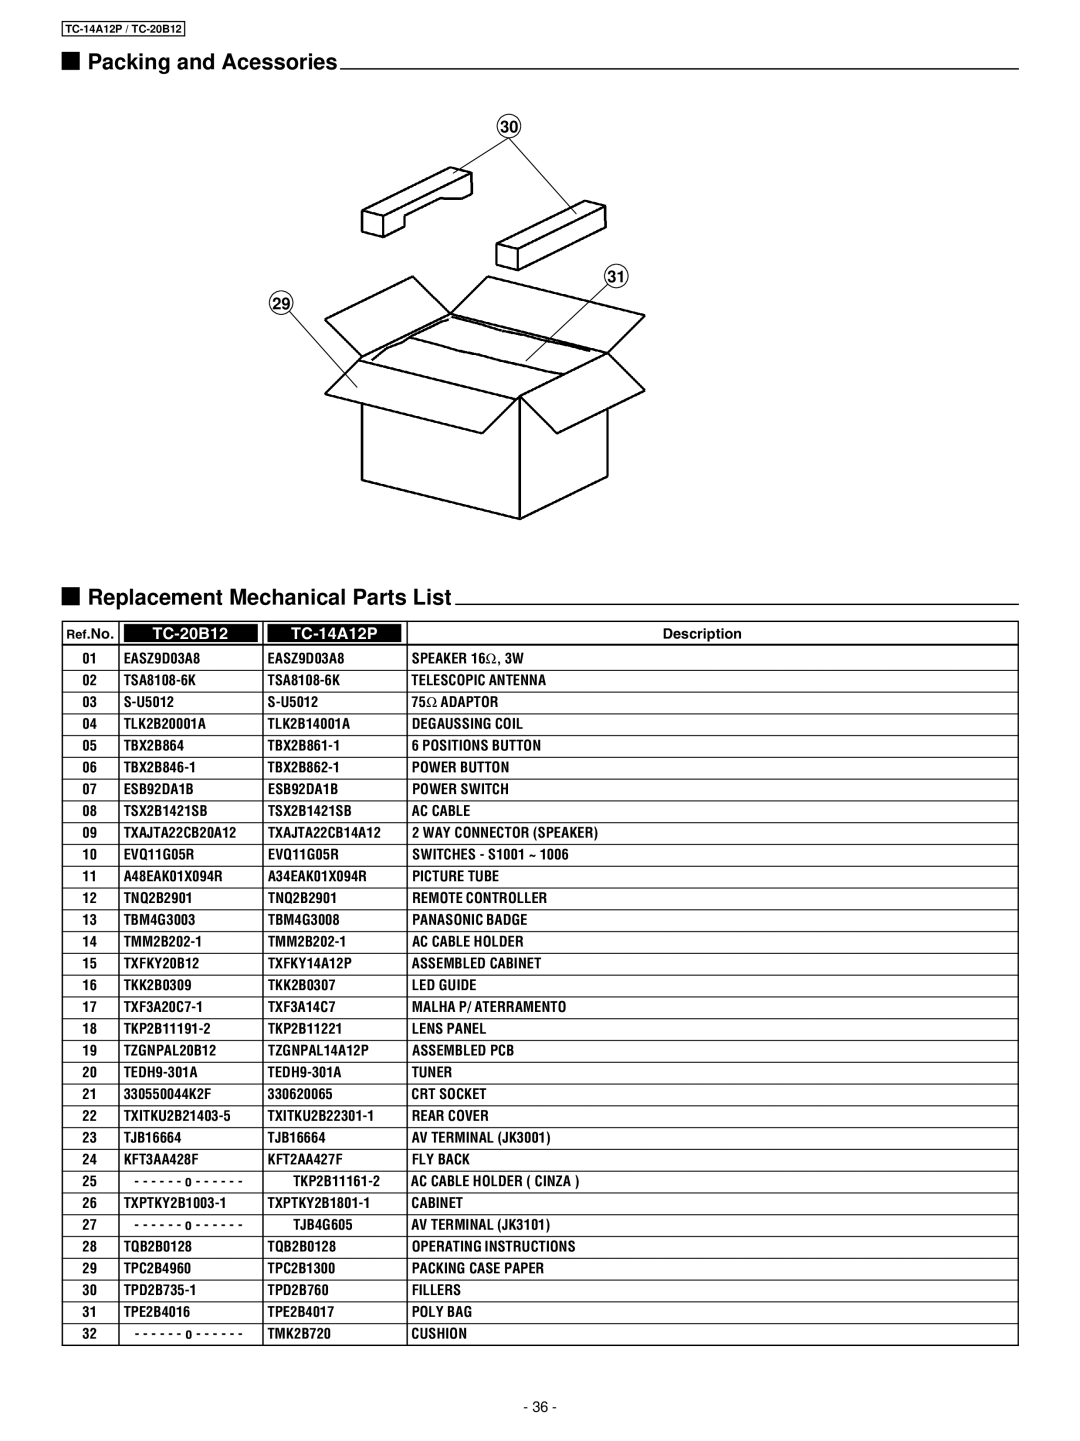 Panasonic TC-20B12 service manual Packing and Acessories, Replacement Mechanical Parts List, TC-14A12P 